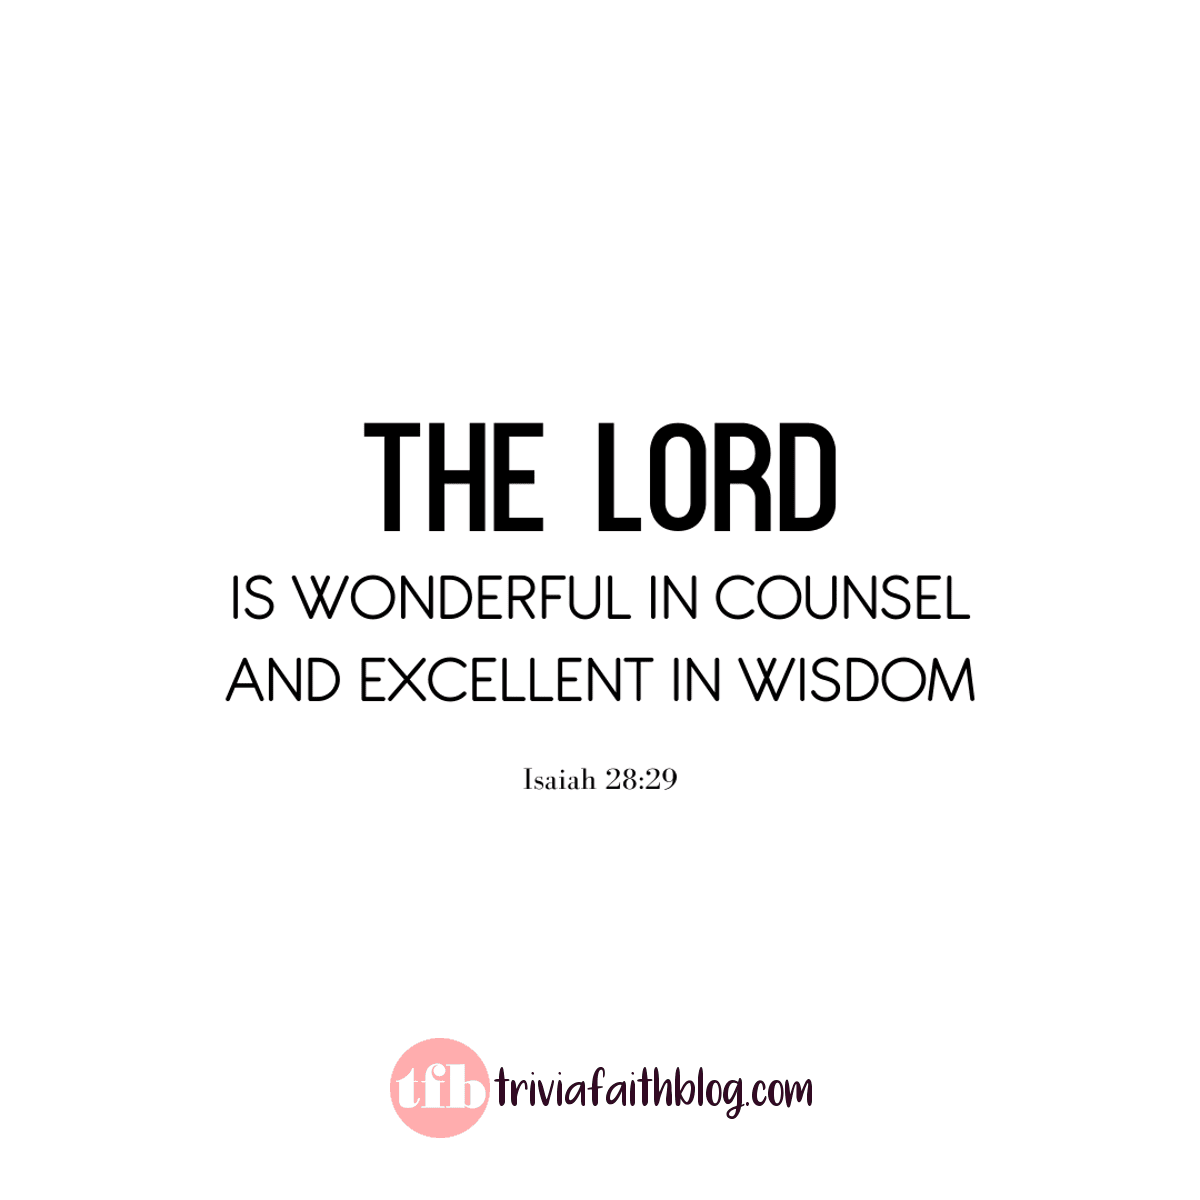 All this also comes from the Lord Almighty, whose plan is wonderful, whose wisdom is magnificent